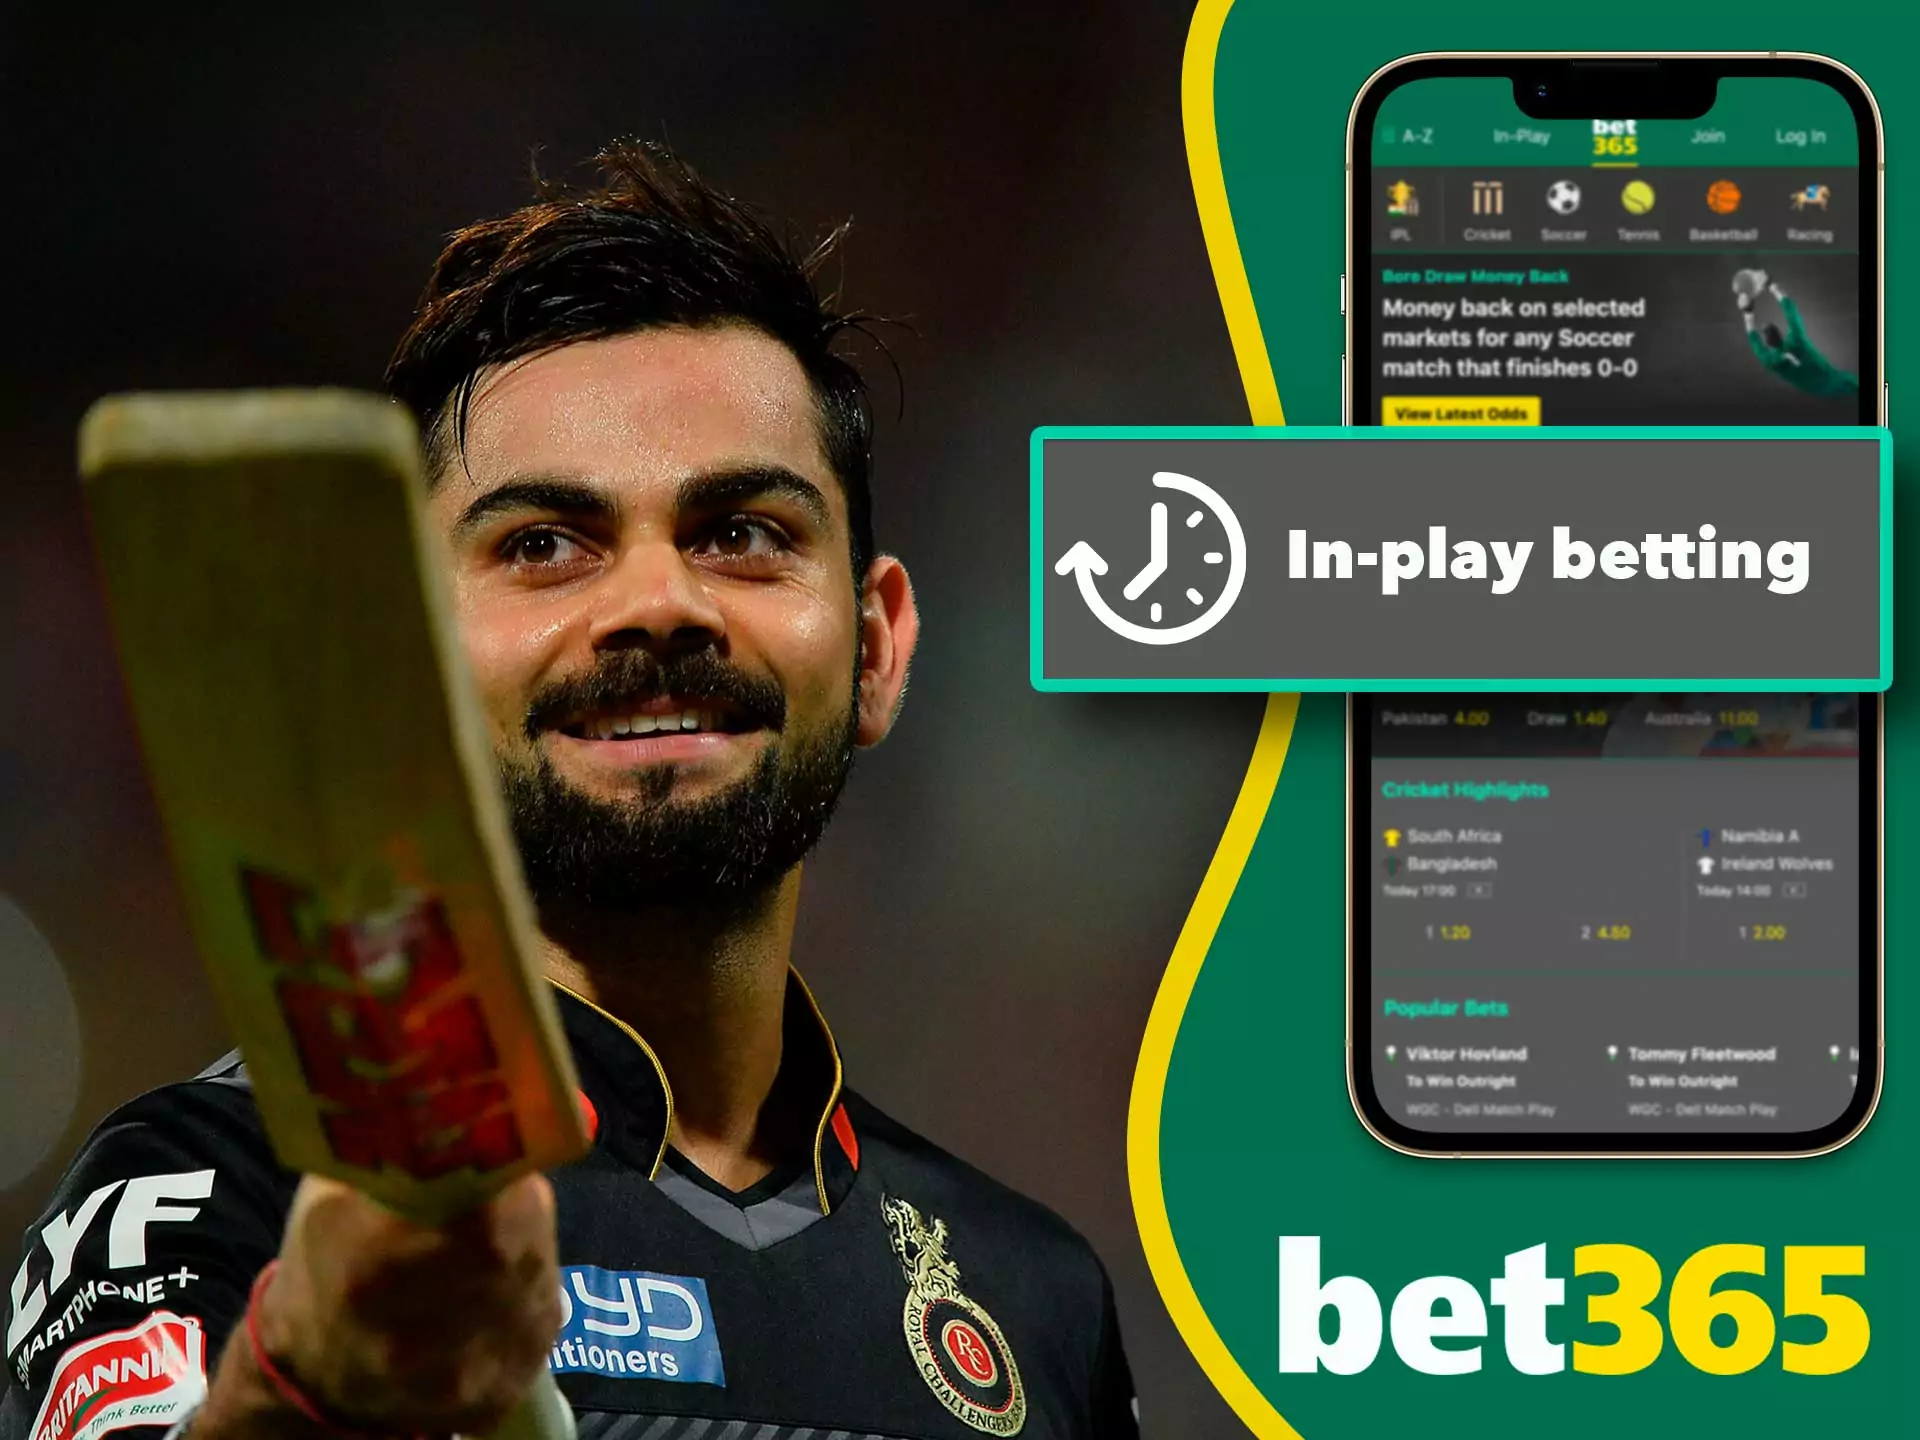 Bet365 app live betting allows to bet you during the game.